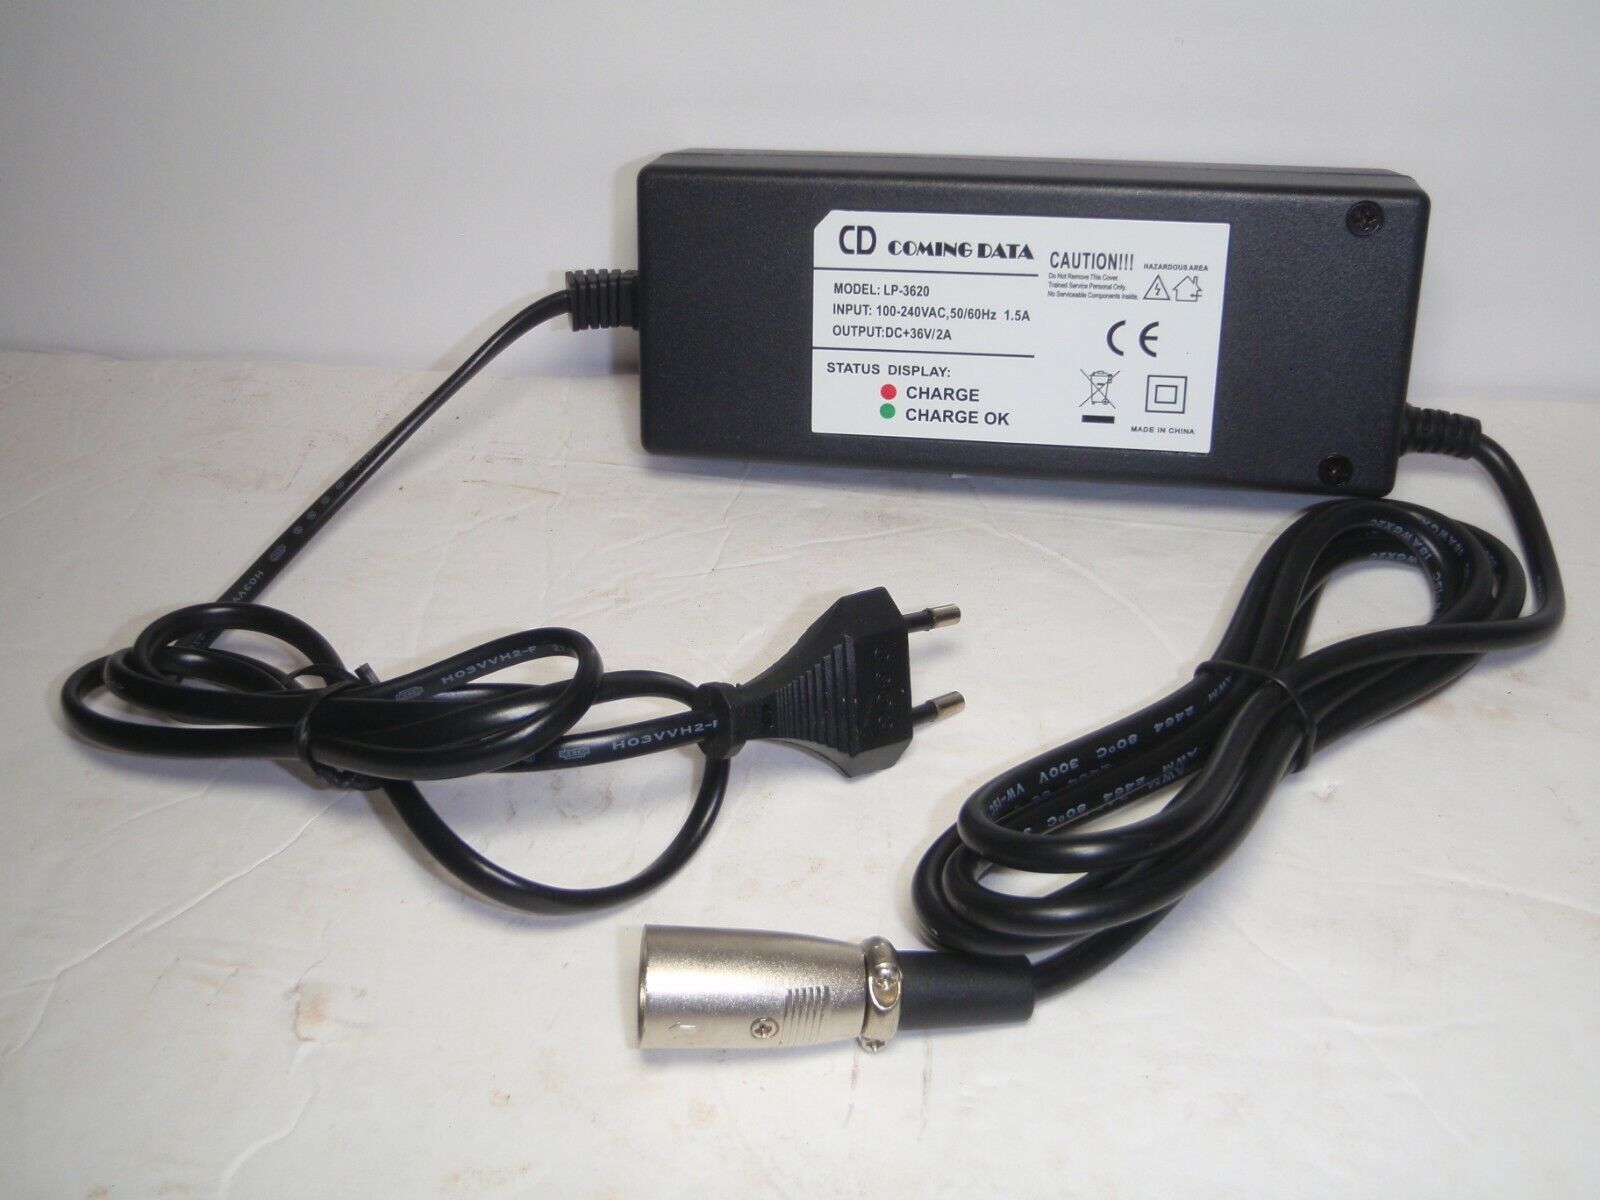 Adapter Charger CD Coming Data LP-3620 Ming Data 100-240vac, 50/60 hz, 1.5a Type: Adapter Compatible Model: altered e